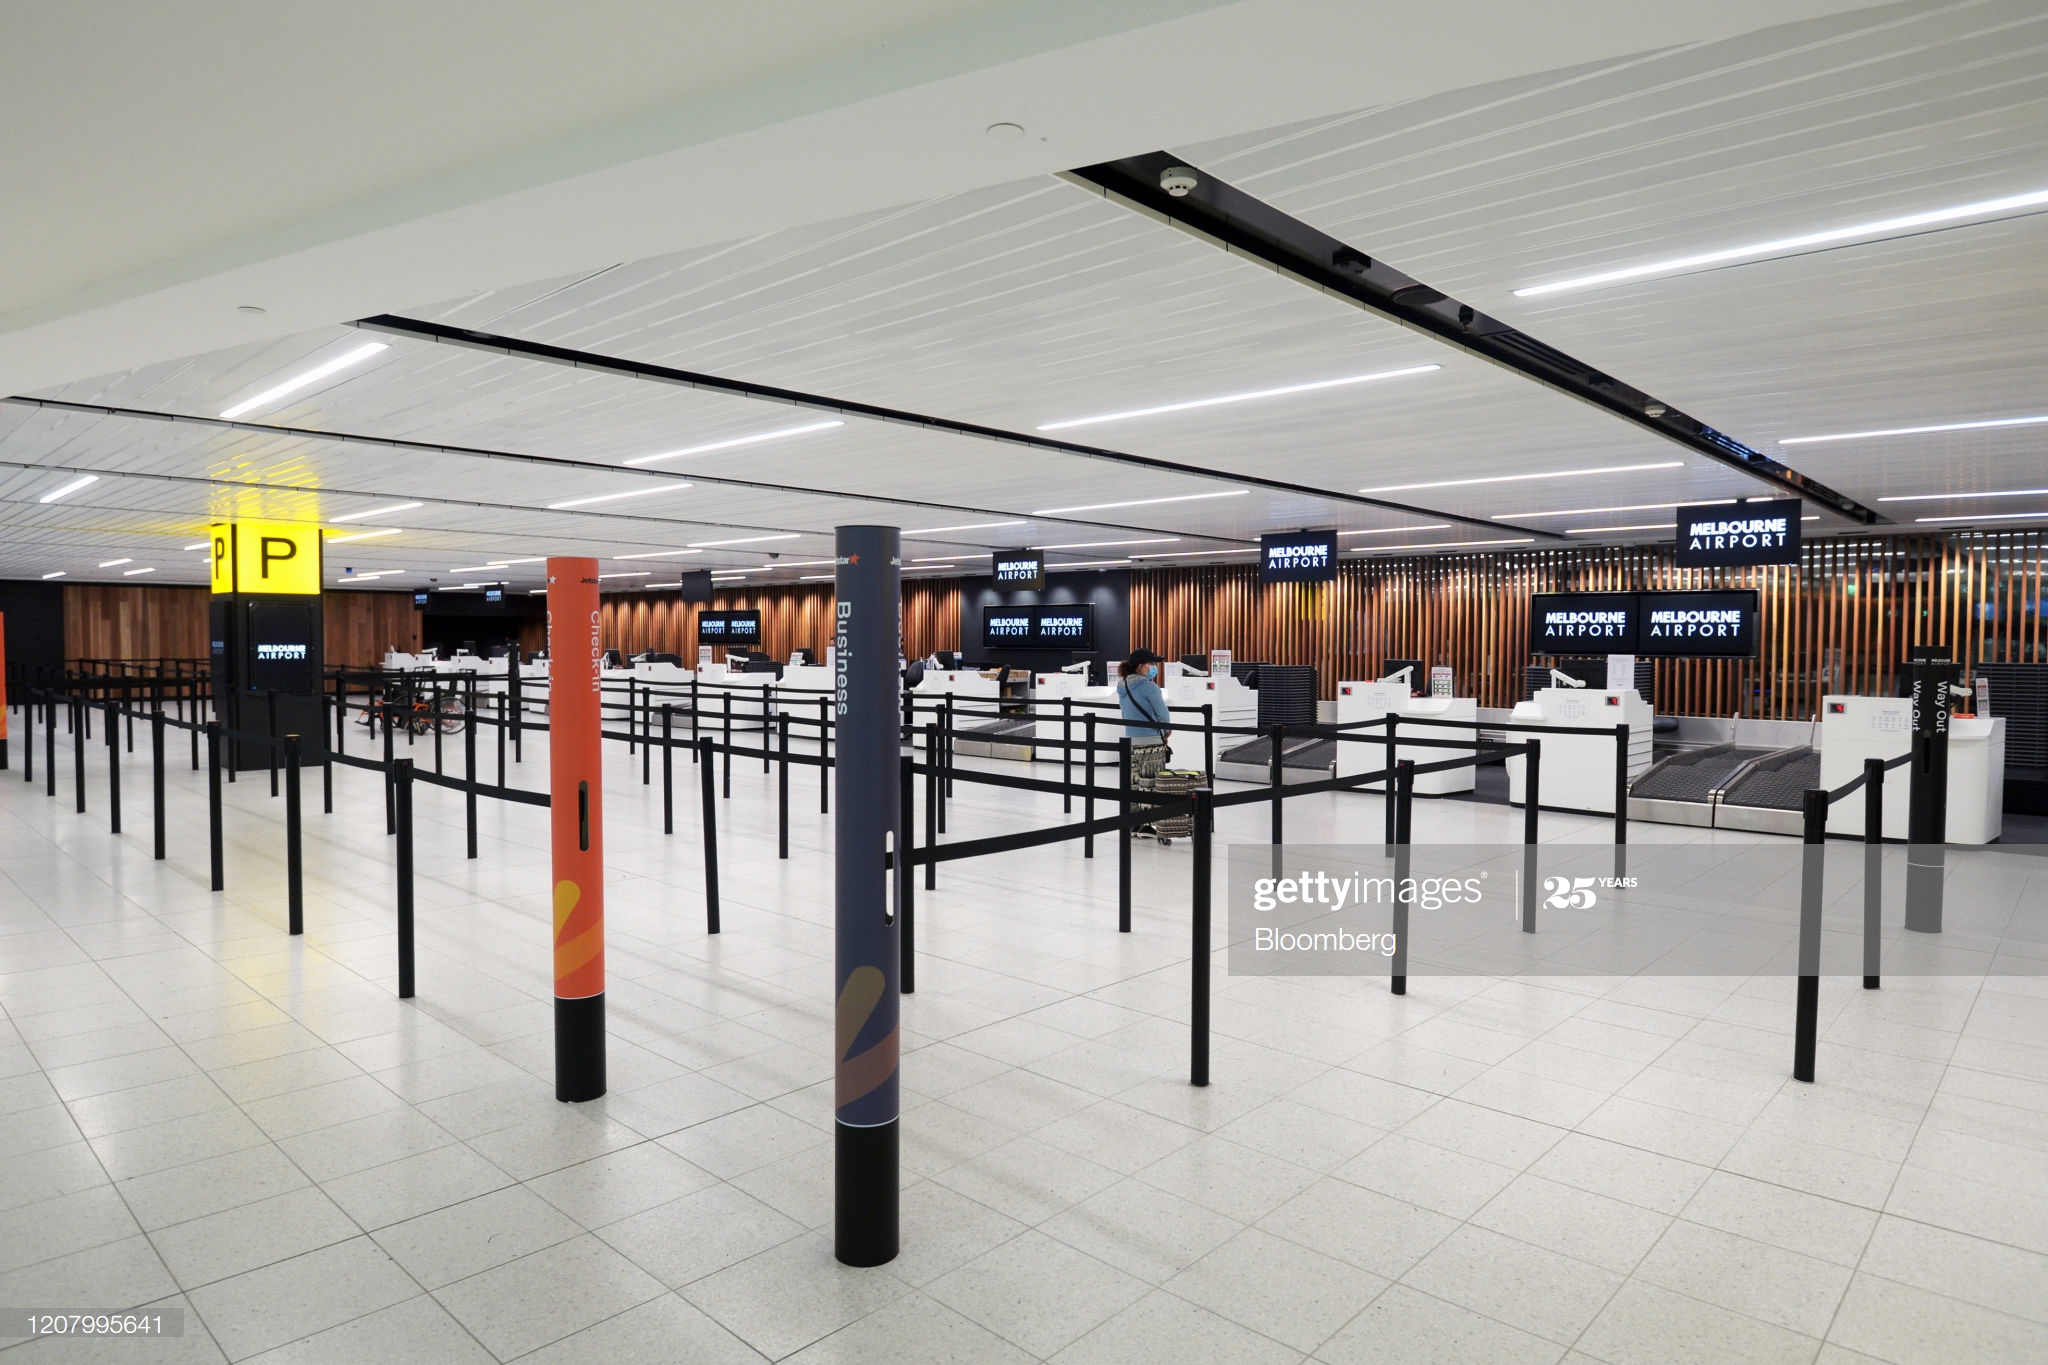 passenger-waits-beyond-checkin-lanes-at-melbourne-airport-in-on-picture-id1207995641